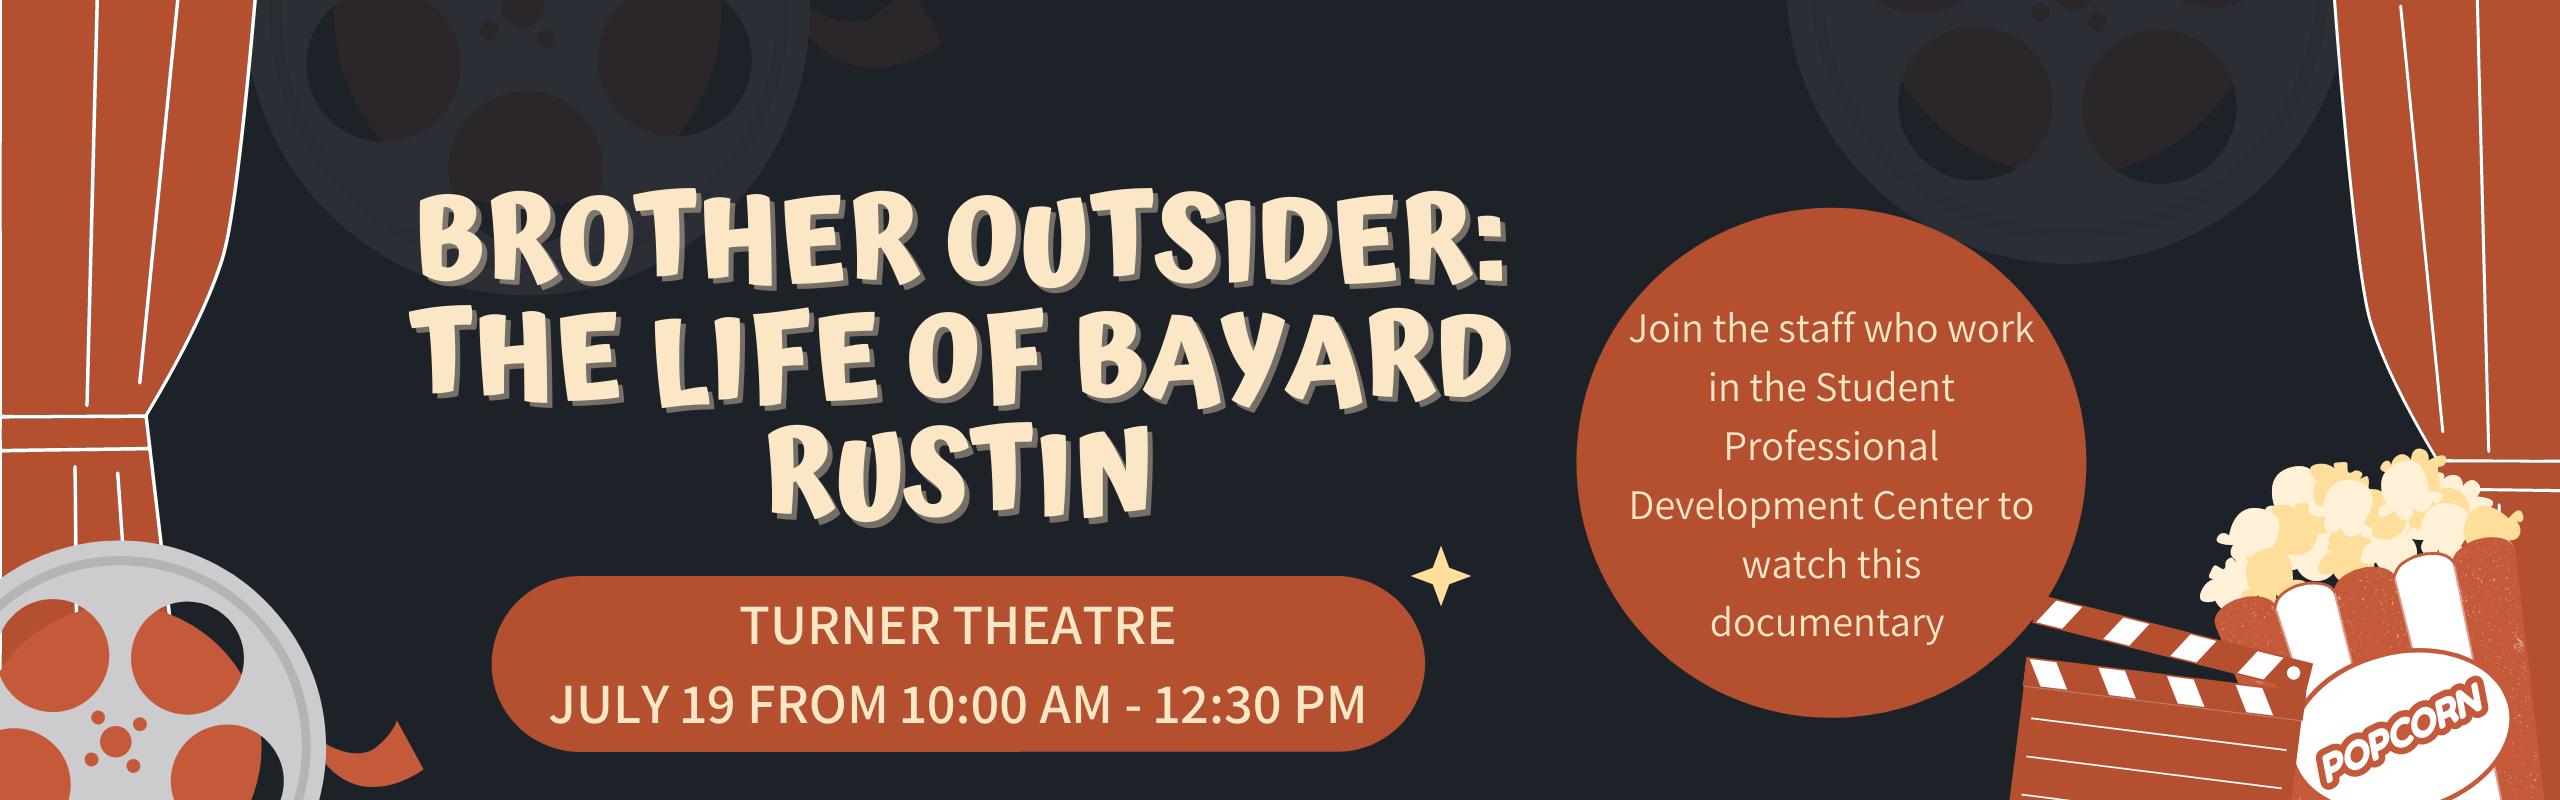 Brother Outsider The Life of Bayard Rustin Movie Viewing in Turner Theatre July 19